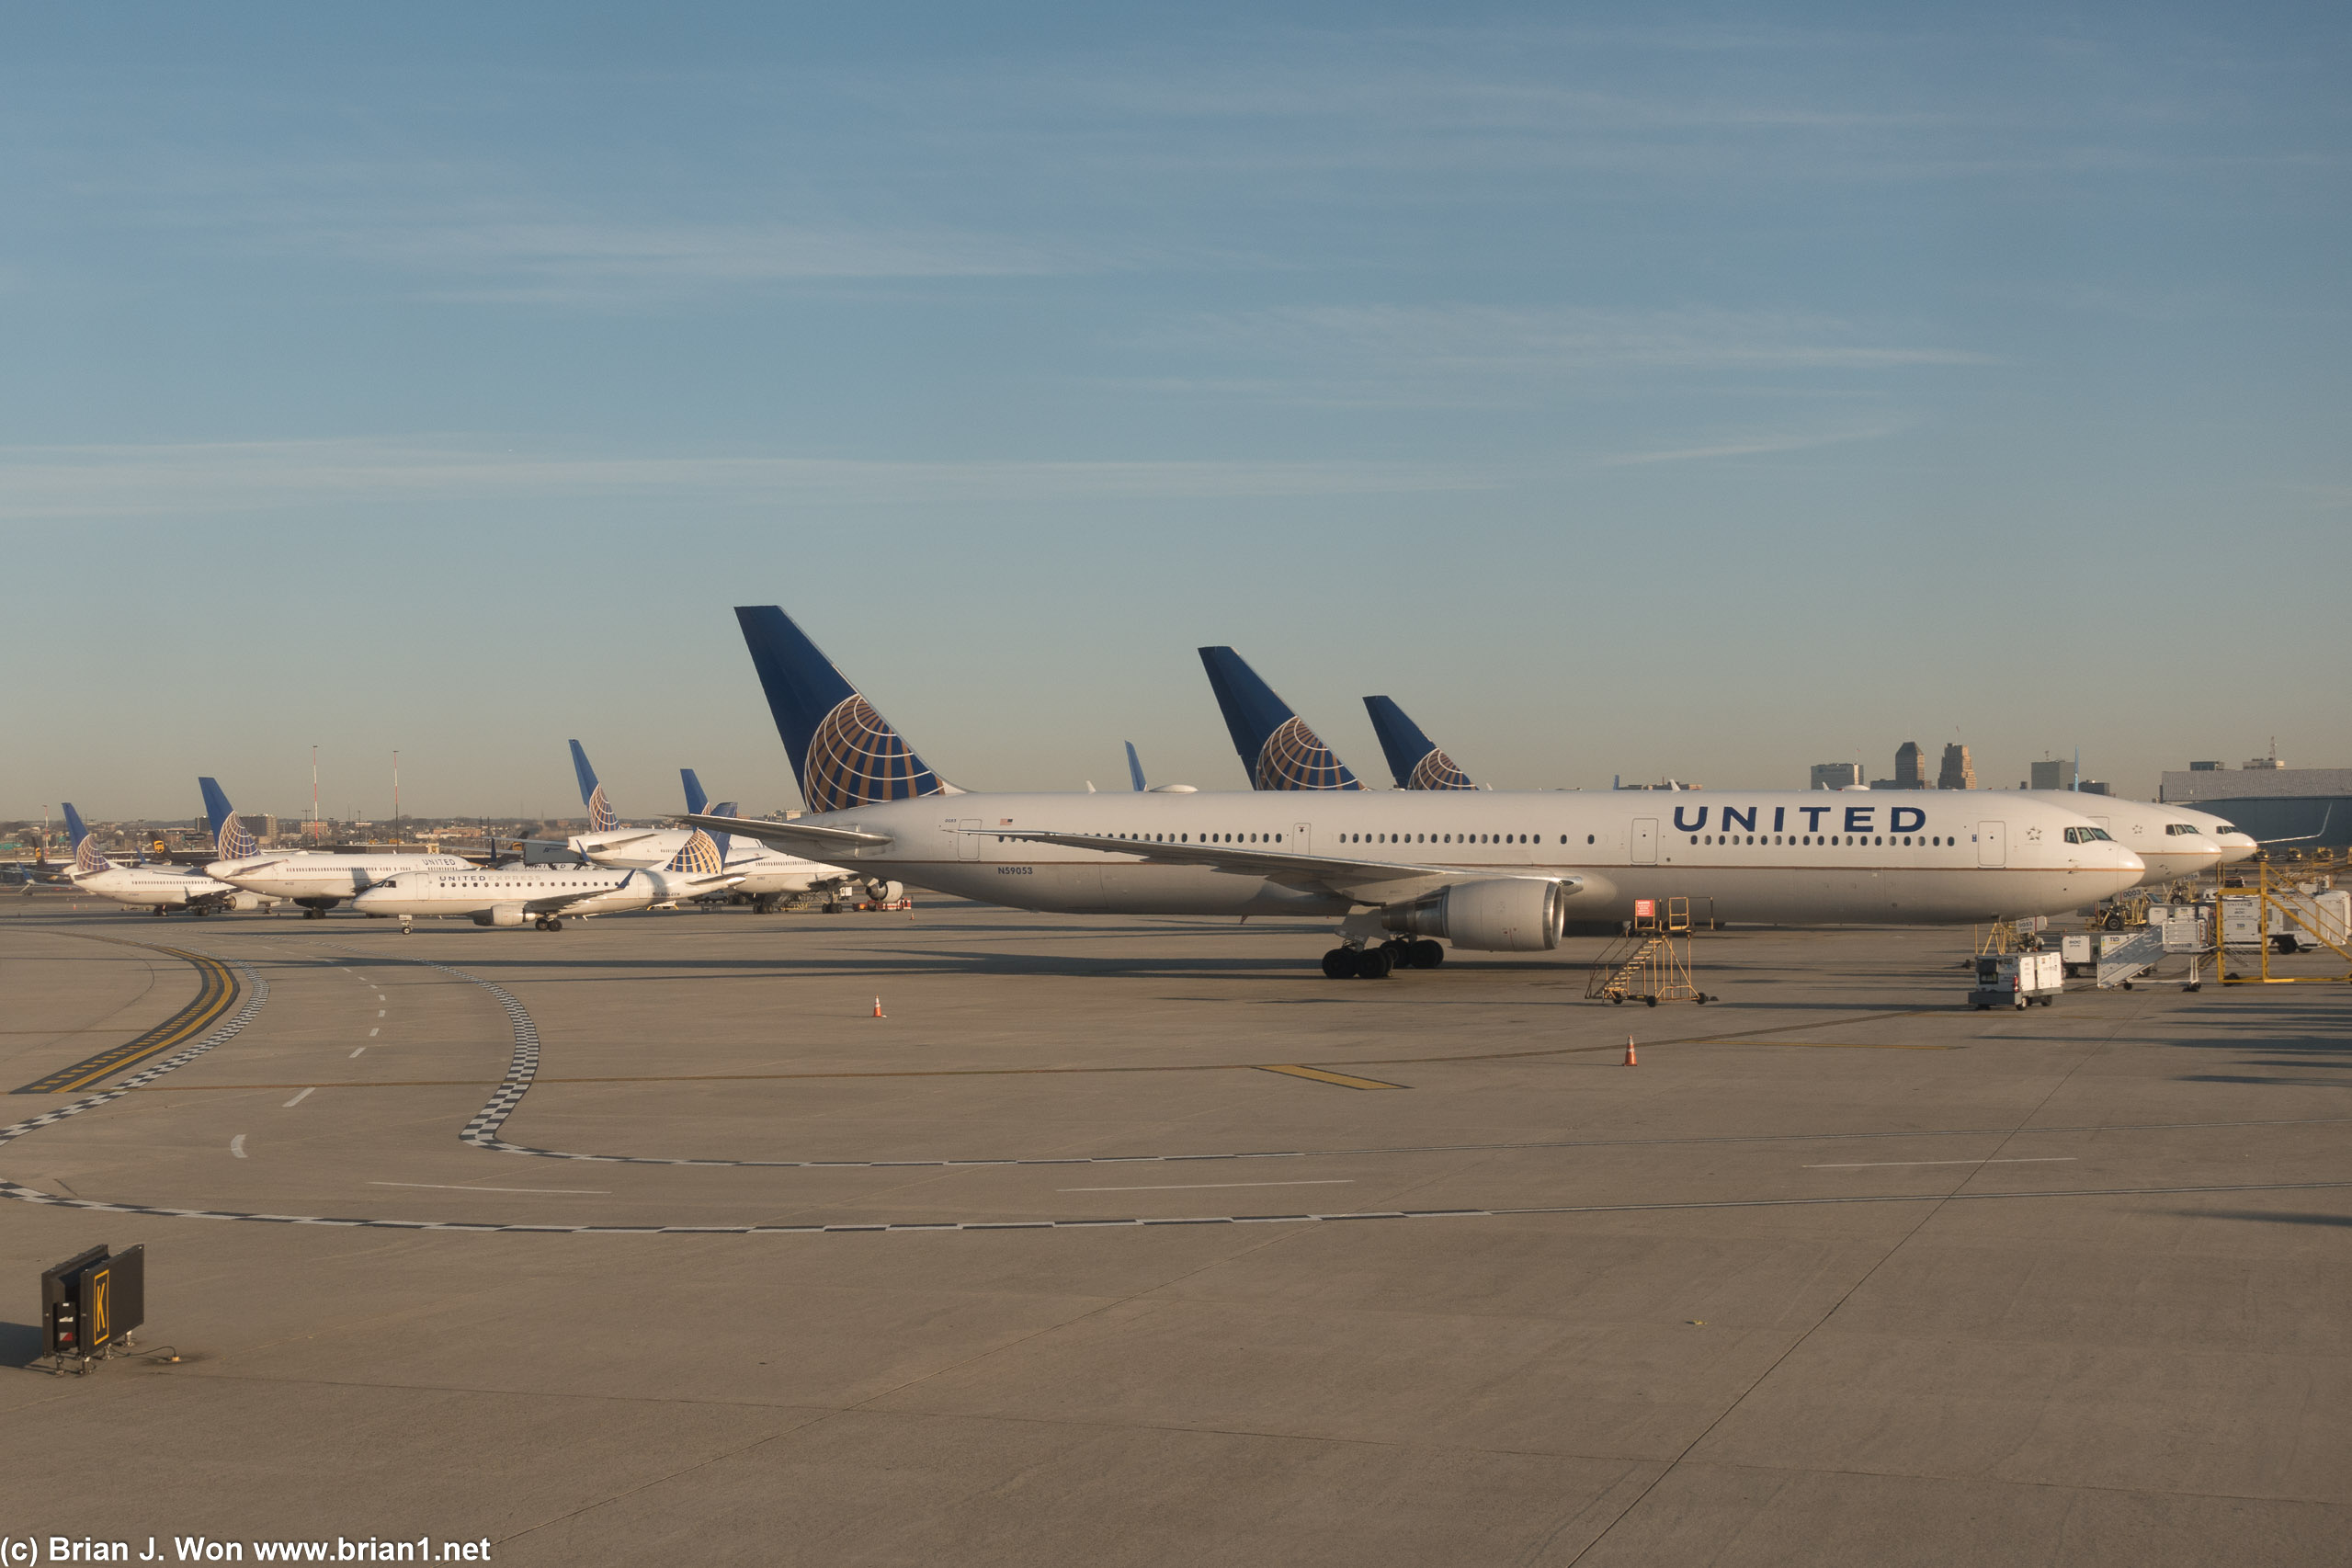 WIdebodies for days. Boeing 767-400 in the foreground.